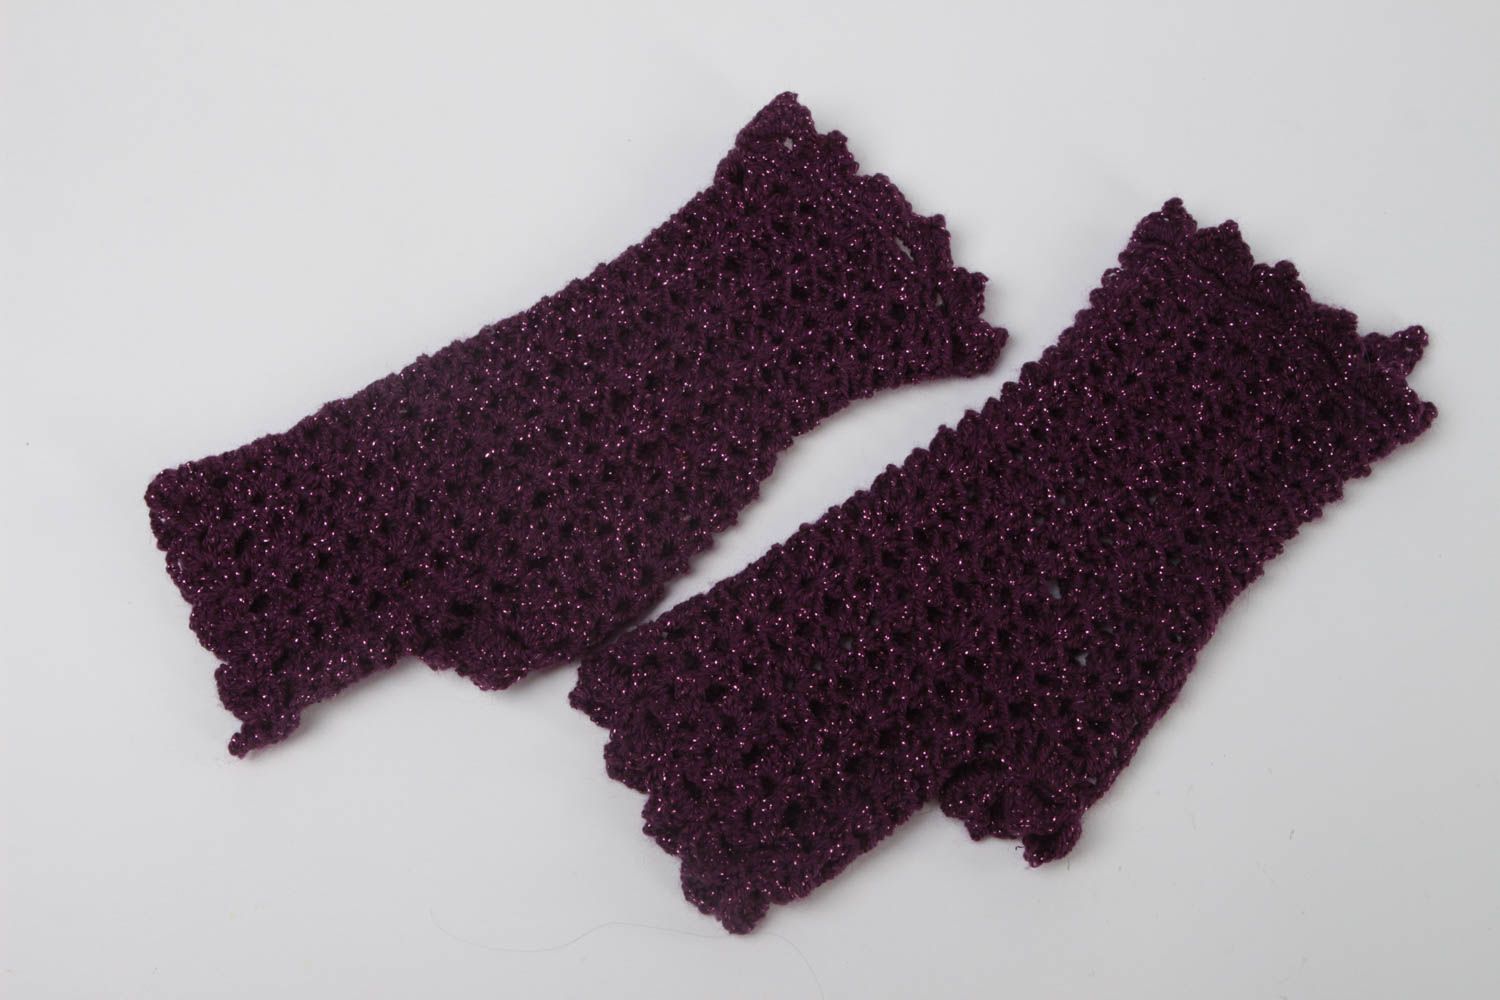 Handmade crocheted mitts violet winter accessories stylish female mittens photo 2